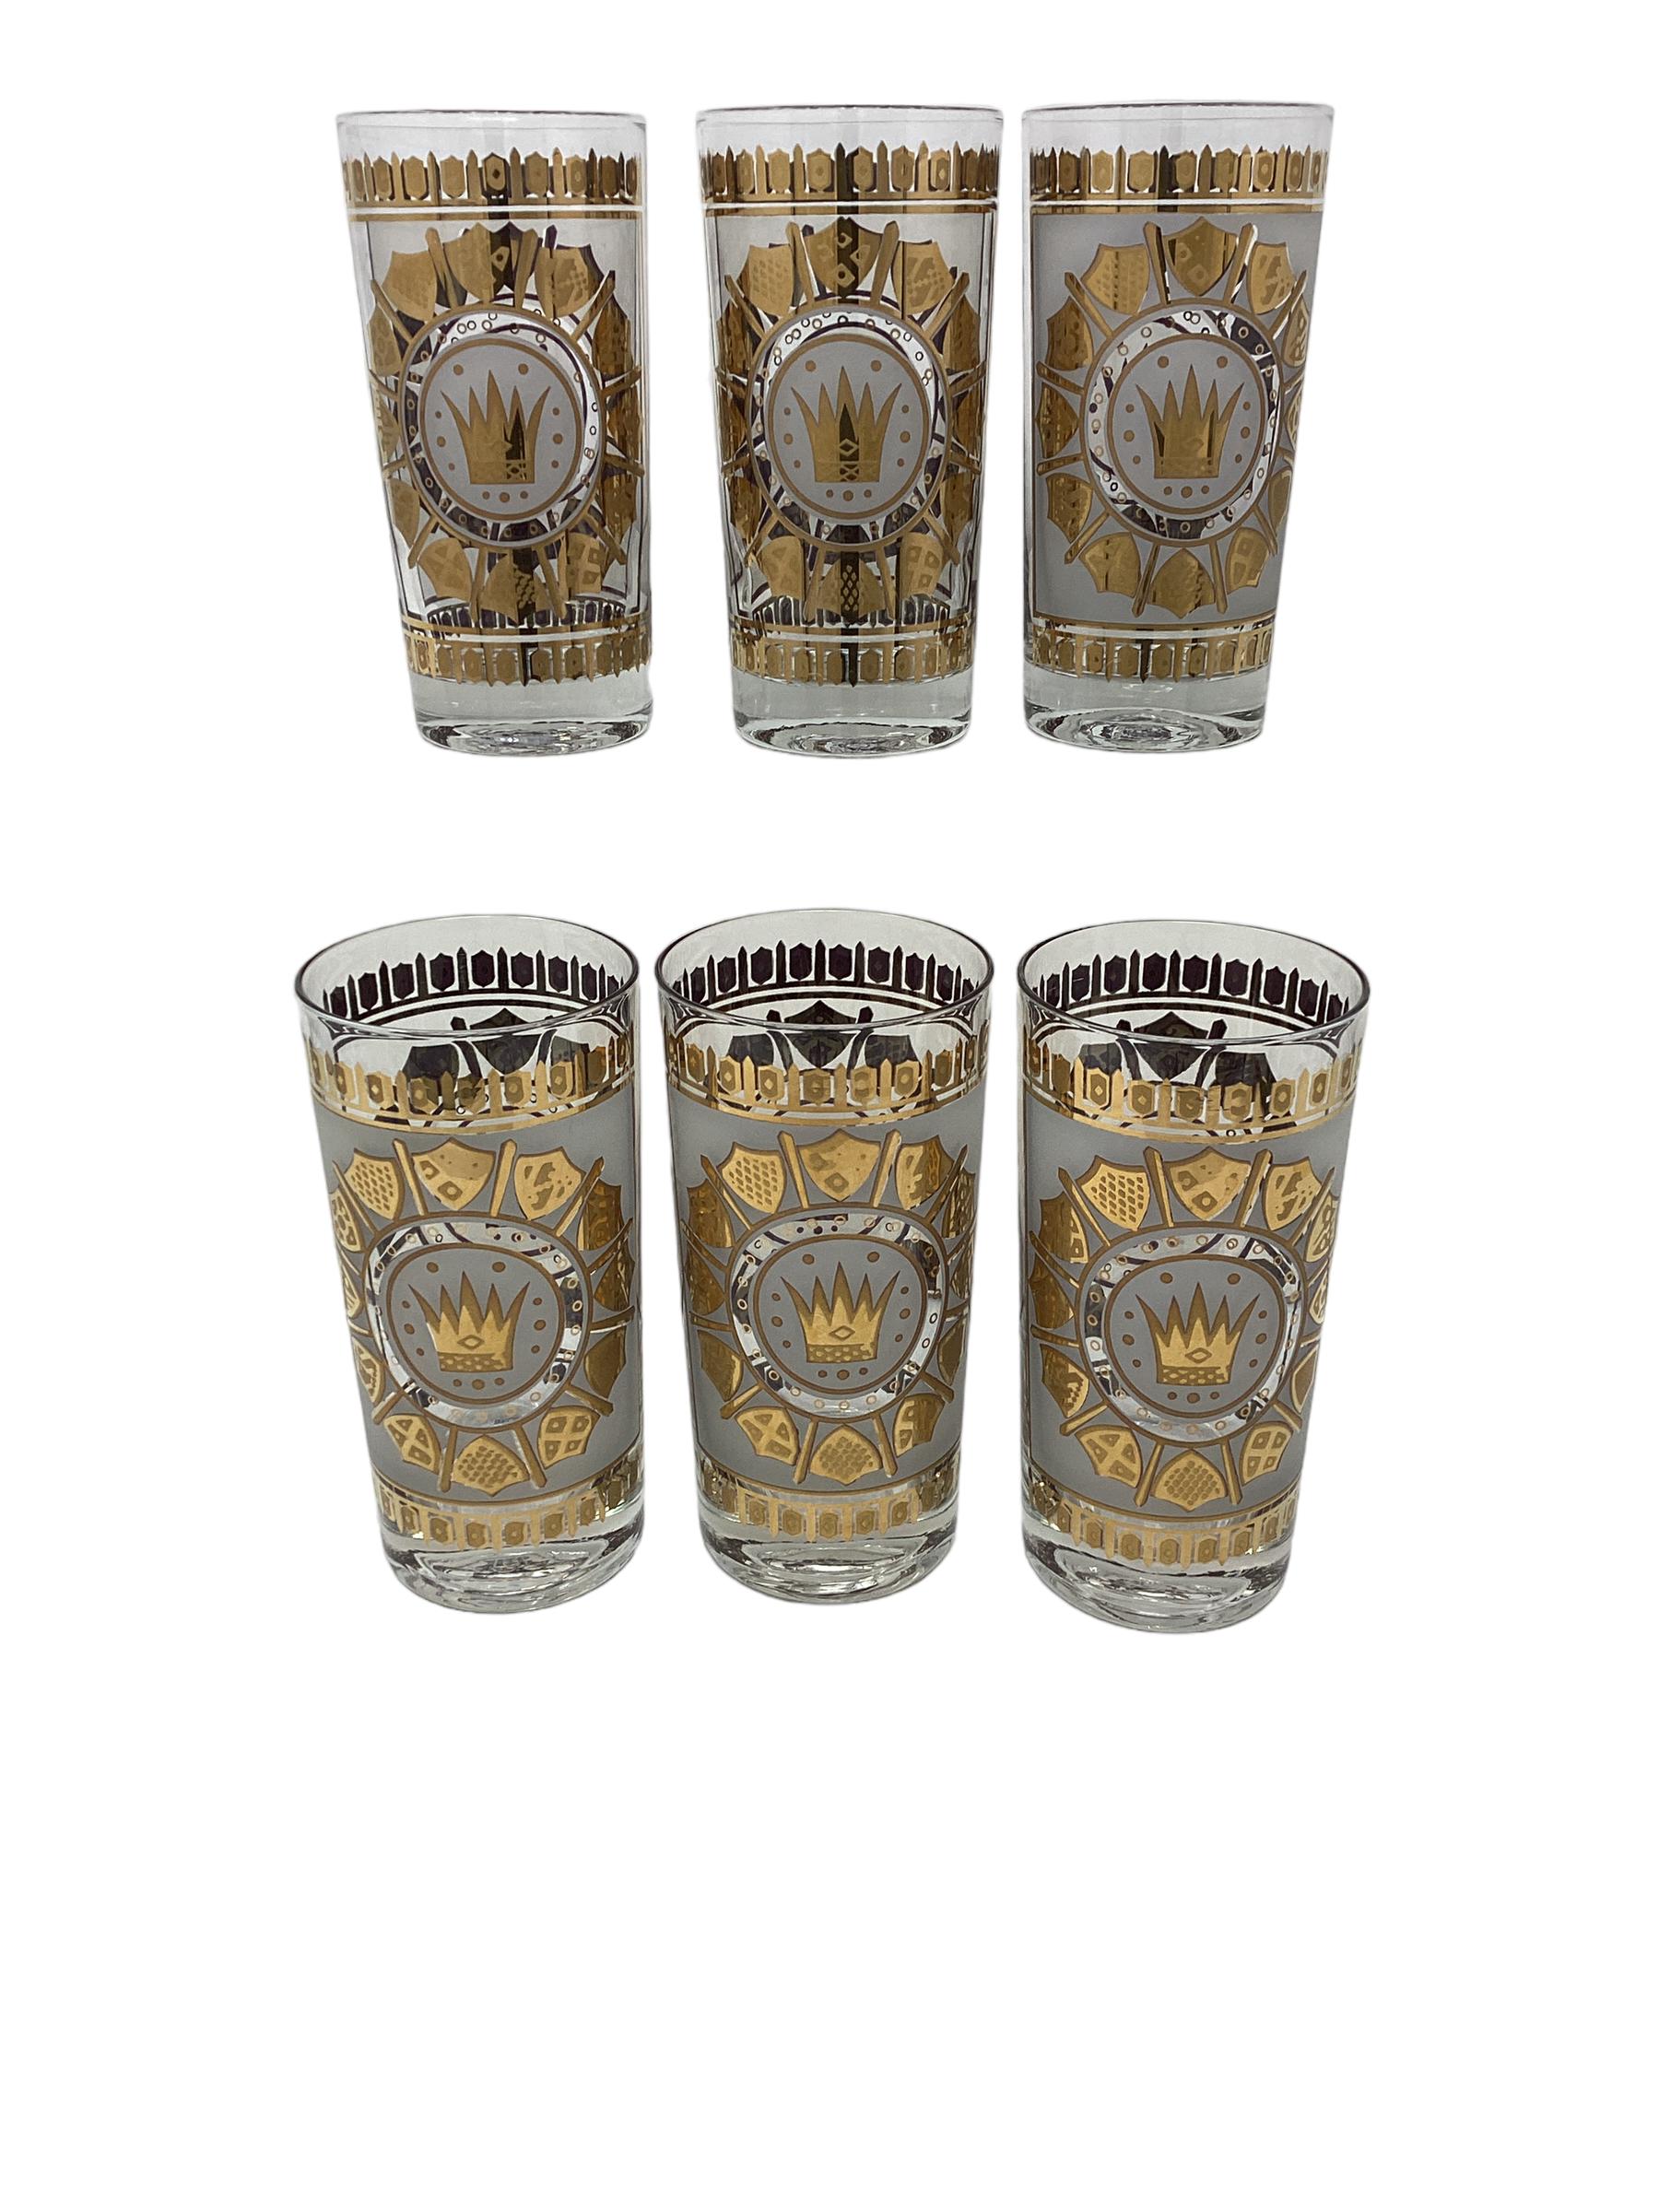 American Set of 6 Highball Glasses with Crowns and Shields Decoration. For Sale